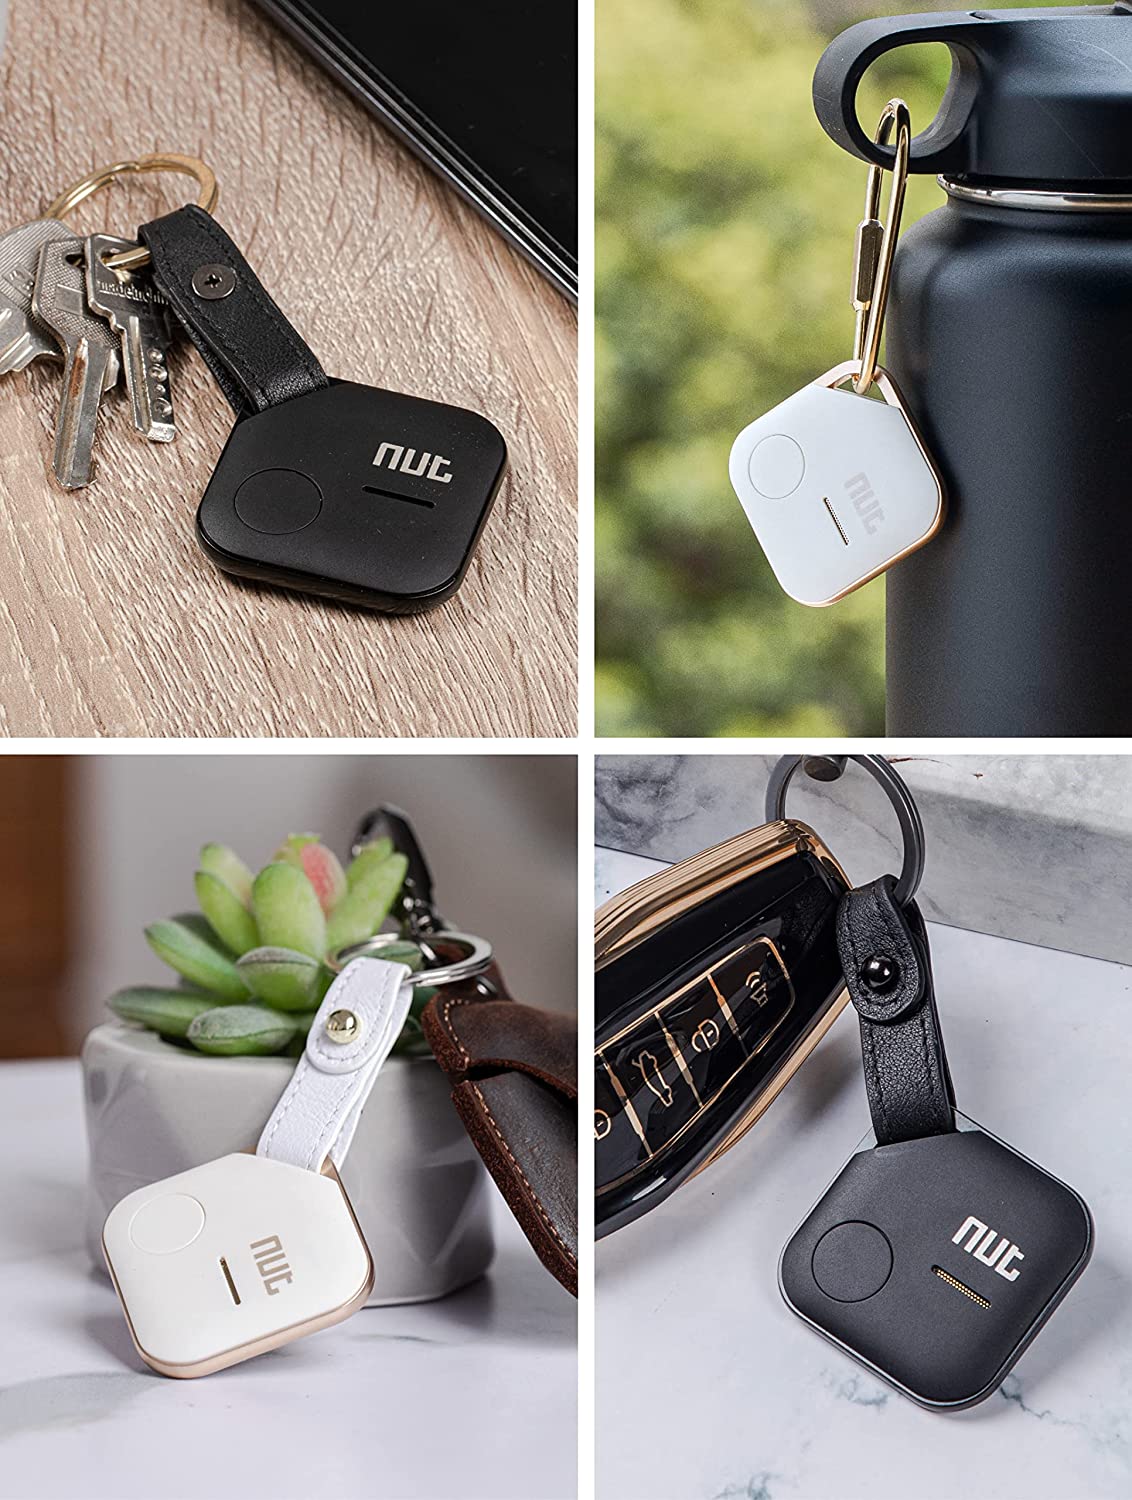 Nutale Key Finder, Bluetooth Tracker Item Locator with Key Chain for Keys Pet Wallets or Backpacks and Tablets, Batteries Include (Black, 1 Pack)